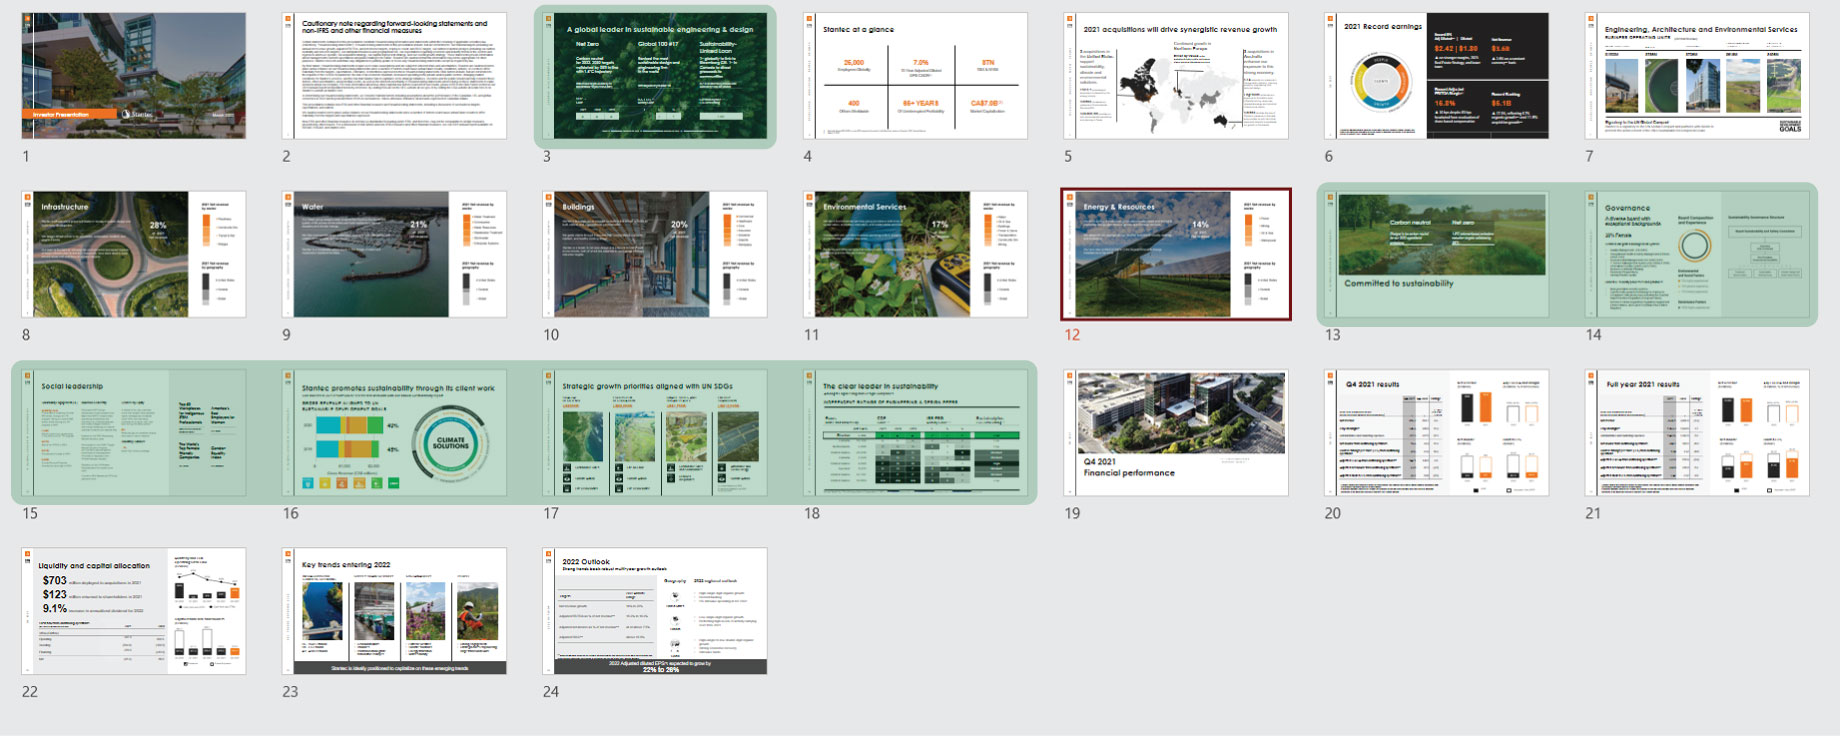 Stantec's investor relations deck with nearly a third of the slides dedicated to sustainability.